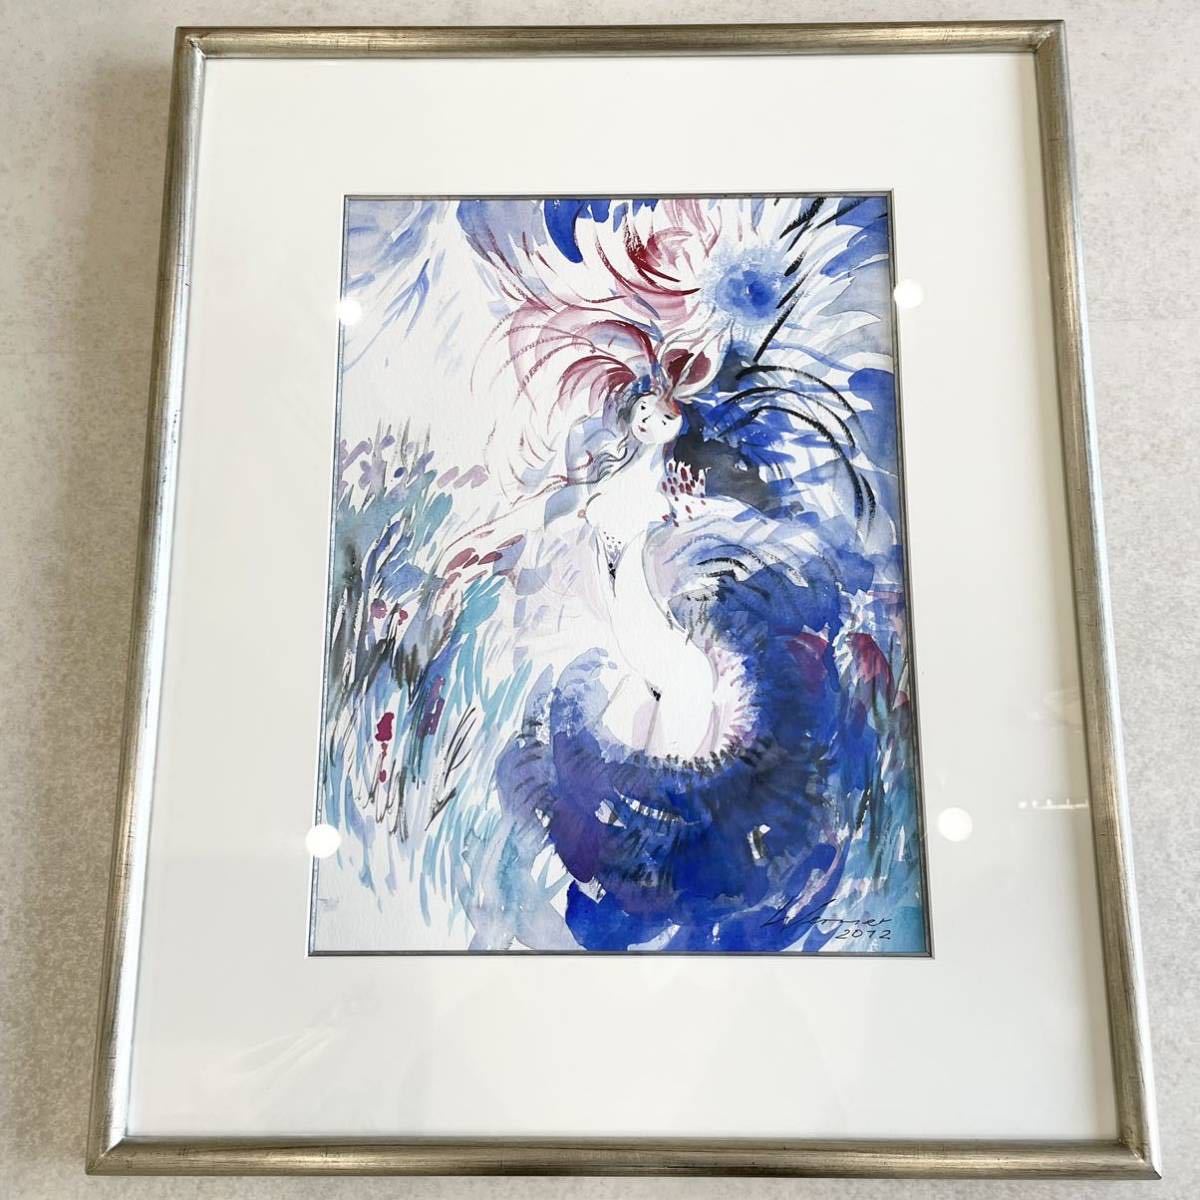 ◇Hand-drawn! Meissen's representative painter◇ Heinz Werner Heinz Werner Dancer Hand-drawn painting Pencil drawing Watercolor painting Framed item 47 x 34.5cm Painting, pottery, western ceramics, meissen